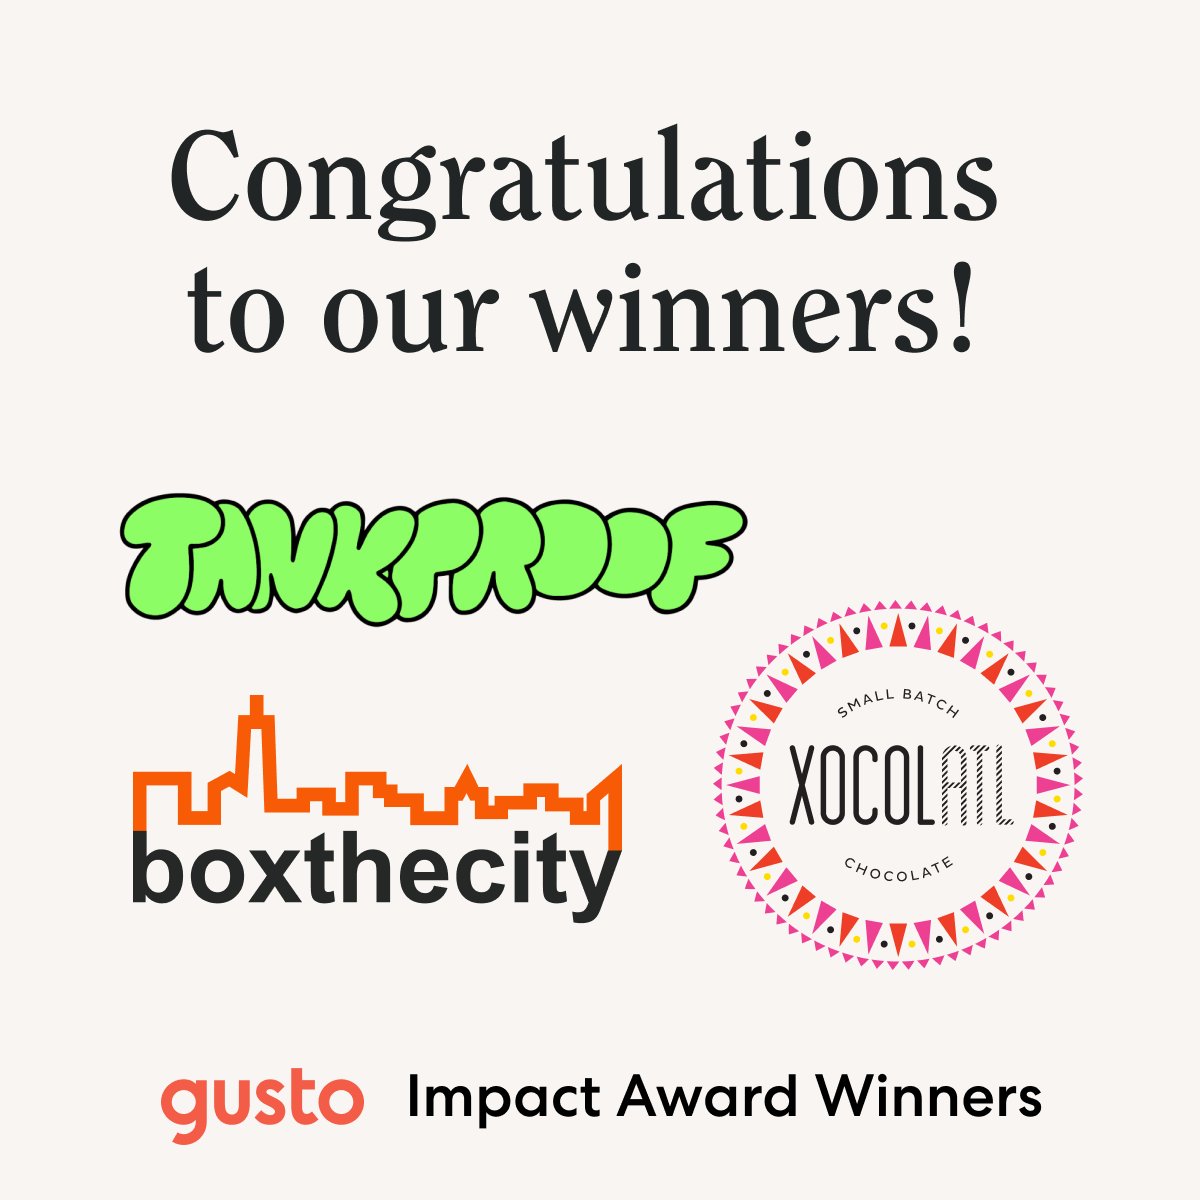 🏆 And your 2024 Gusto Impact Award Winners are... • 🛟 Tankproof, our Austin winner • 🍫 Xocolatl, our Atlanta winner • 🎁 boxthecity, our Orlando winner Learn more about the stories behind Tankproof, Xocolatl, and boxthecity here: gusto.com/company-news/g…